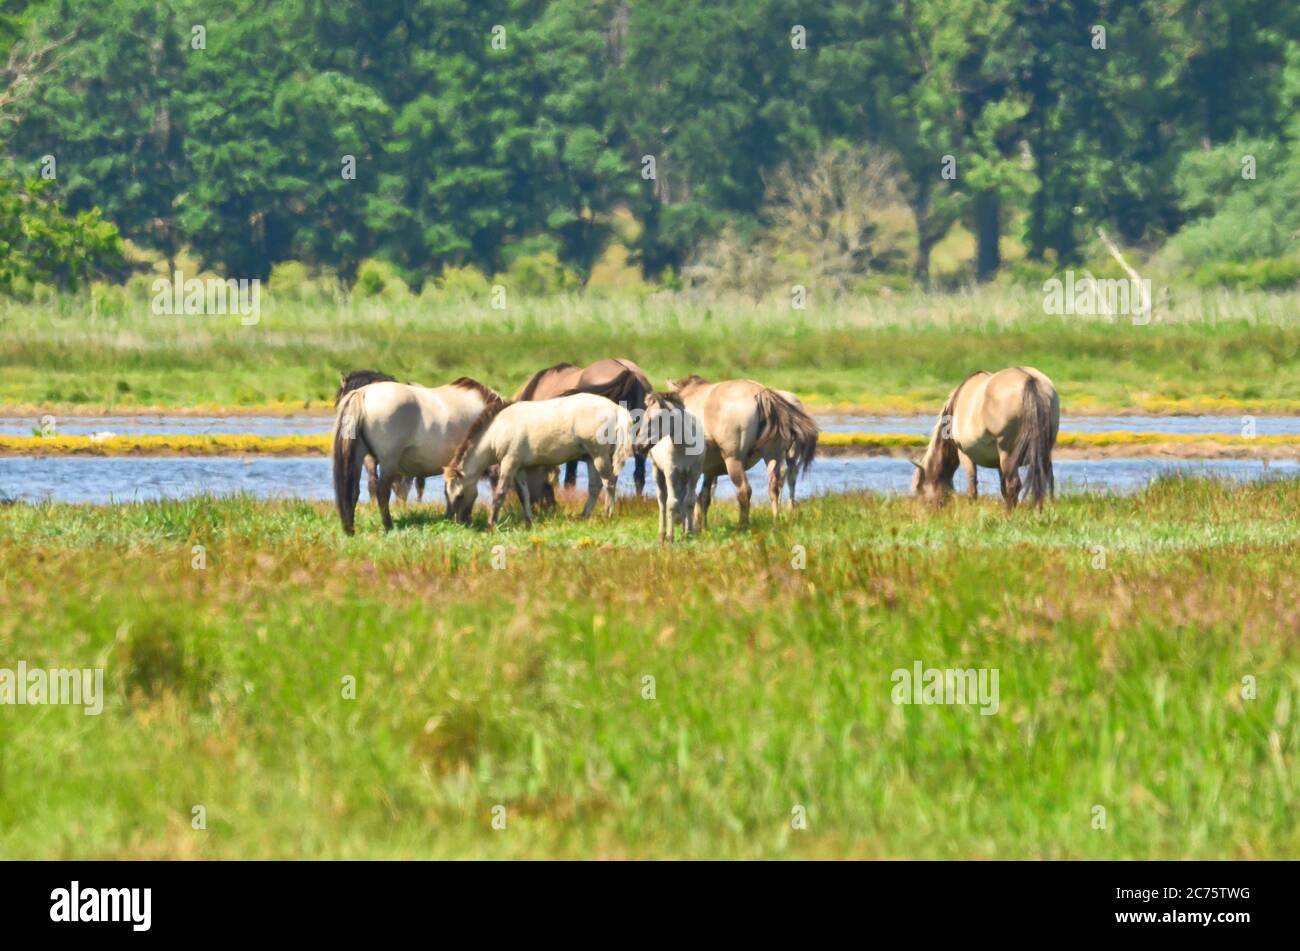 Beautiful area of integral nature reserve in Germany, at the east coast in Gelting, with wild horses and cattle Stock Photo